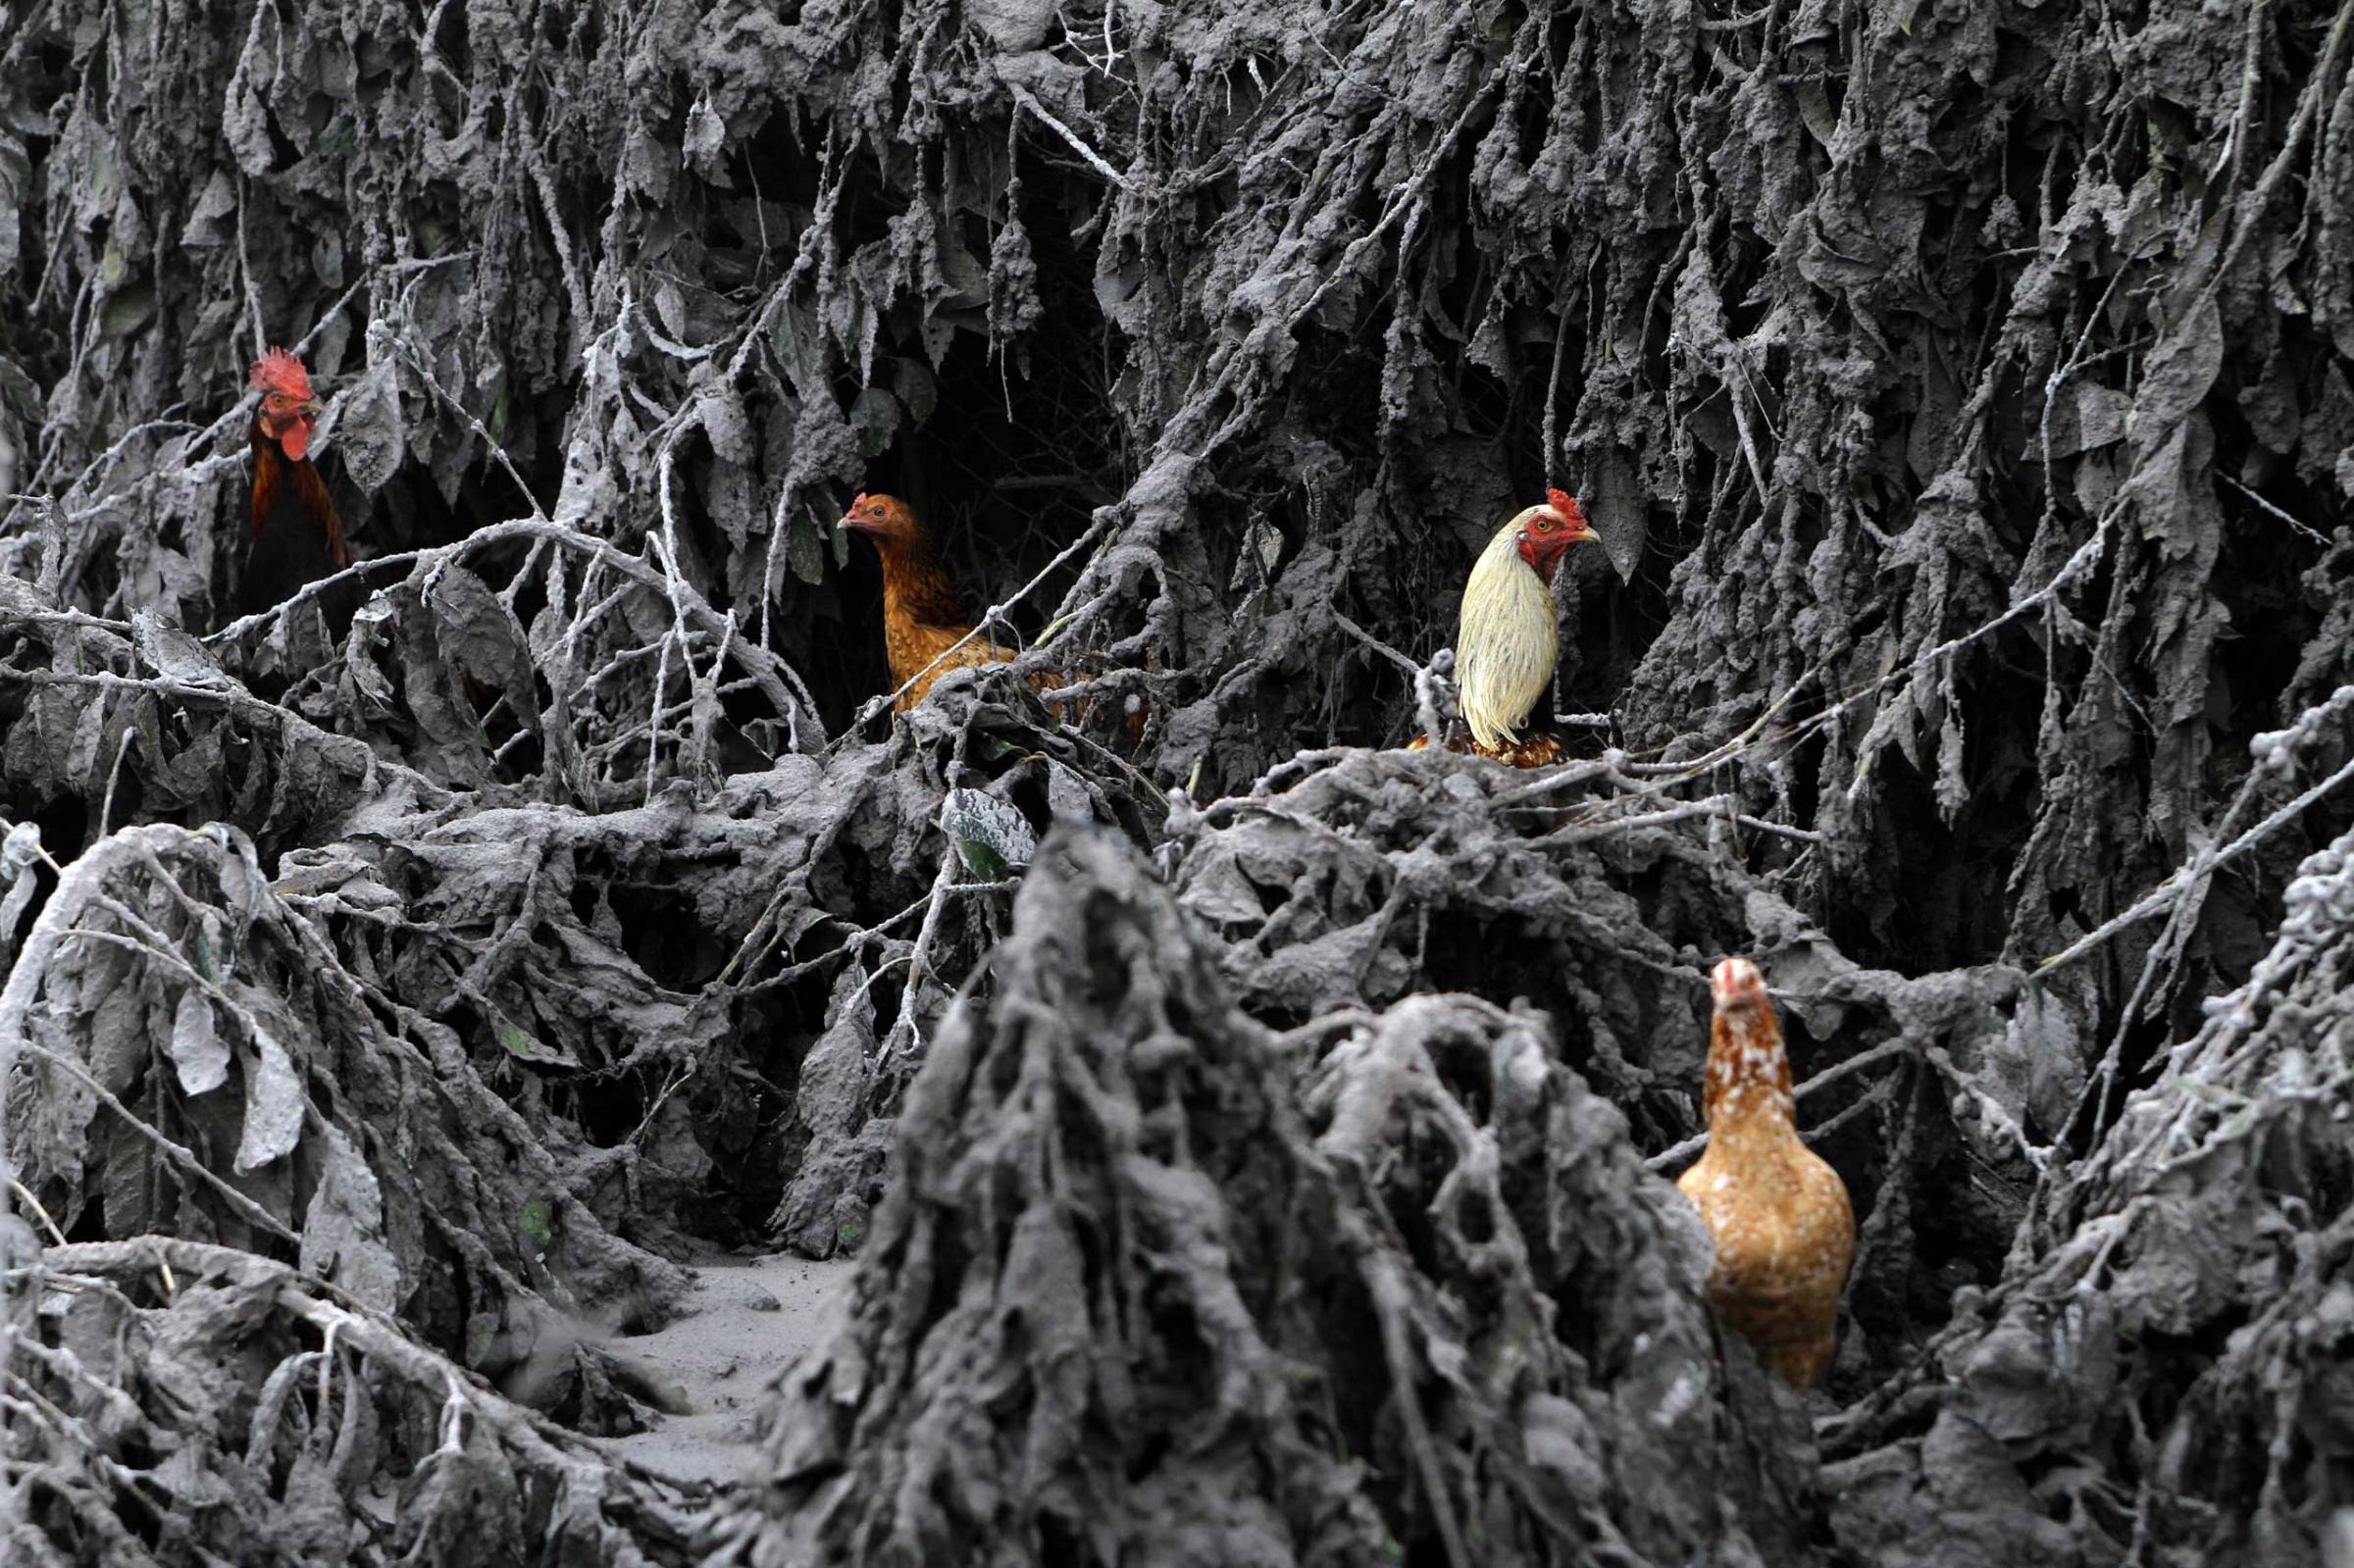 Chickens are seen in the midst of plants covered by ash from Mount Sinabung near Sigarang-Garang in Indonesia's North Sumatra province, Jan. 12, 2014.